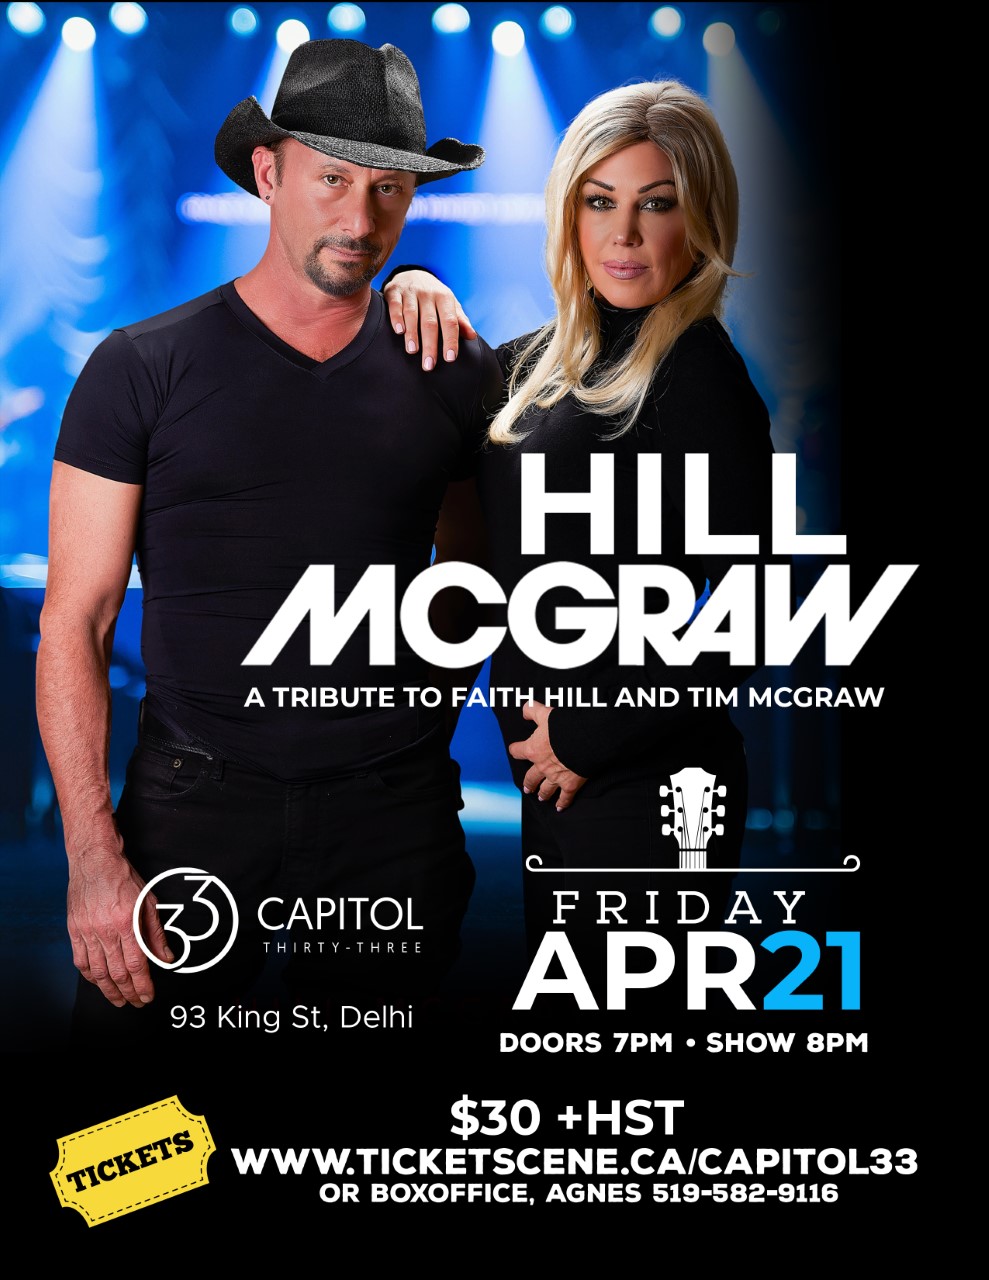 Hill McGraw - A Tribute to Faith Hill and Tim McGraw